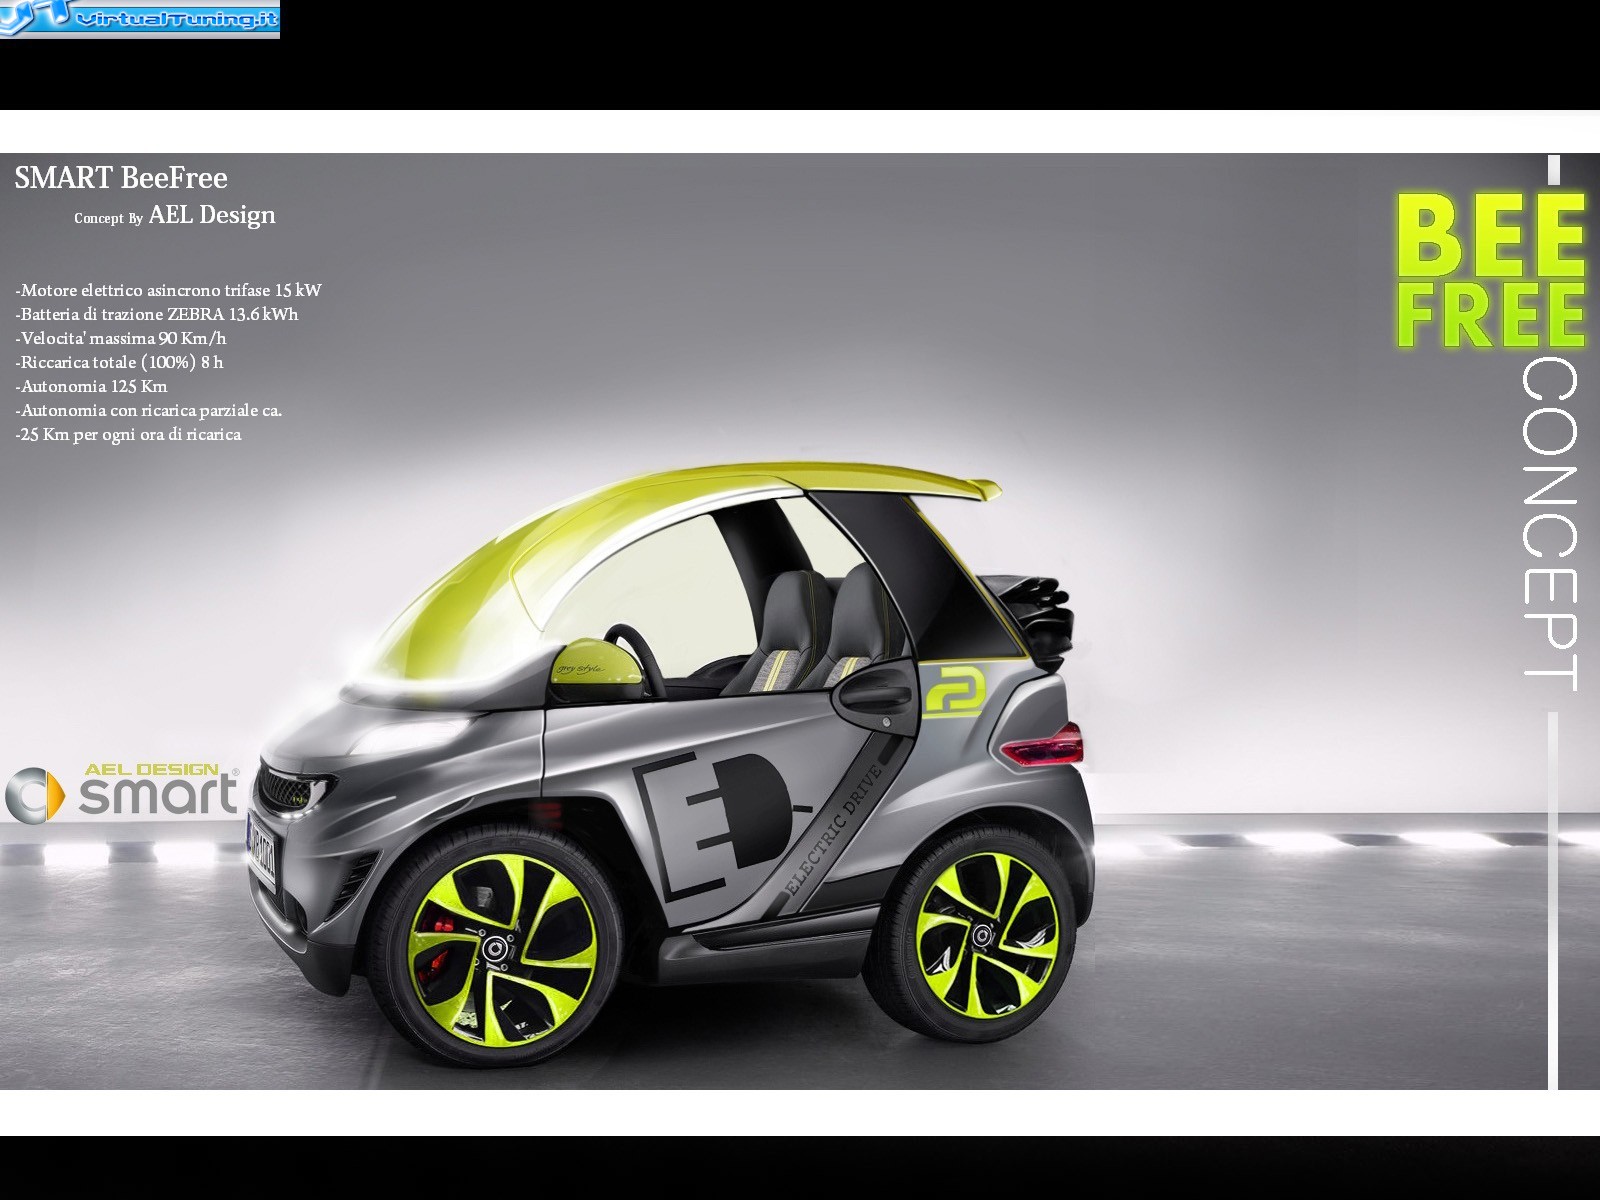 VirtualTuning SMART BeeFreeConcept by AEL Design